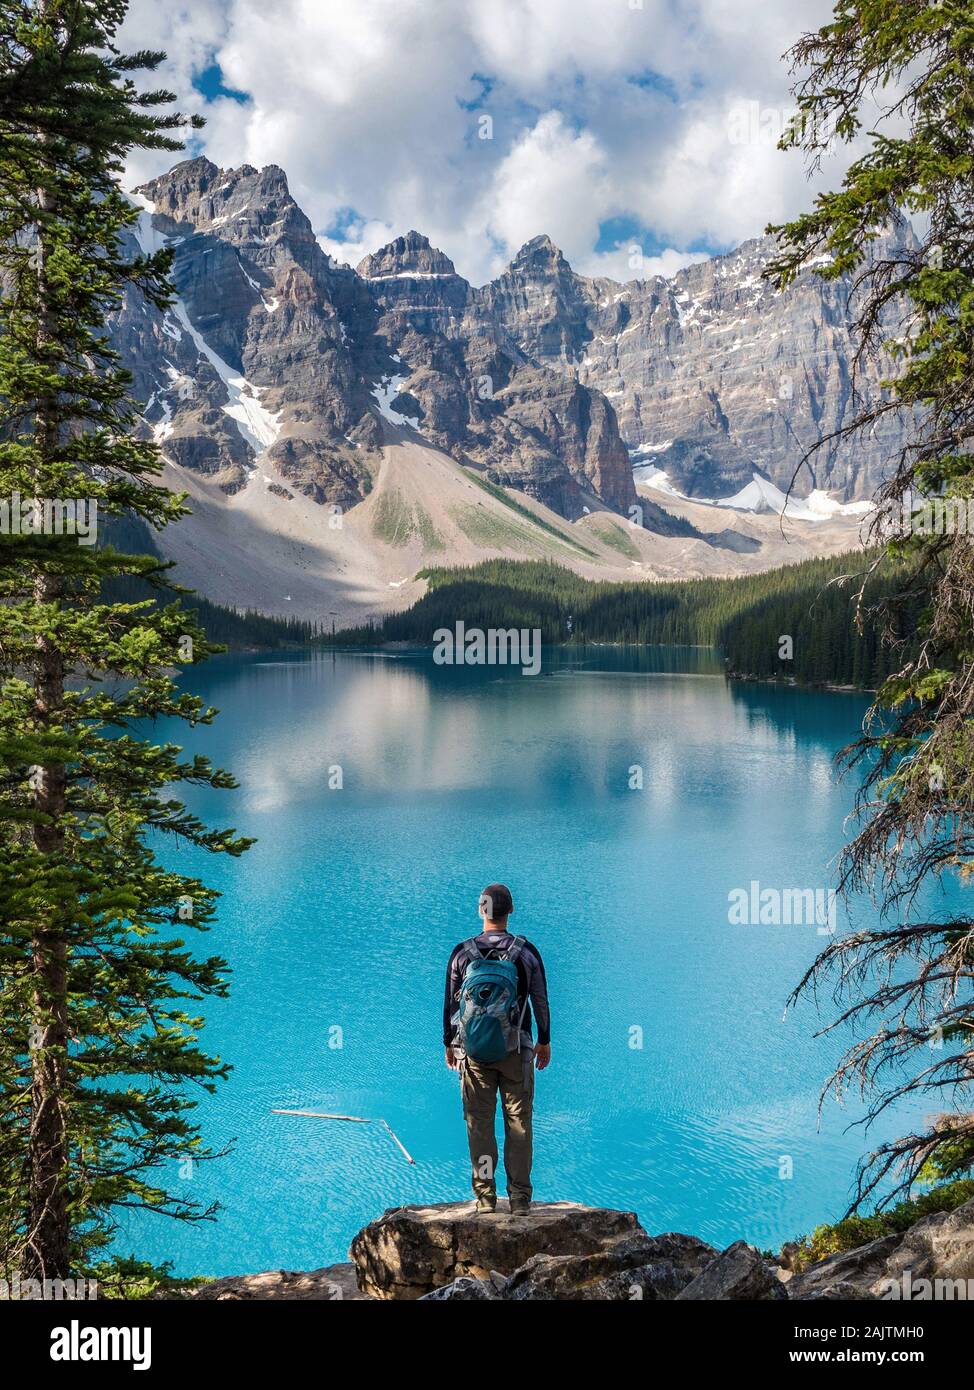 Hiker looking at the view at Moraine Lake during summer in Banff National Park, Canadian Rockies, Alberta, Canada. Stock Photo